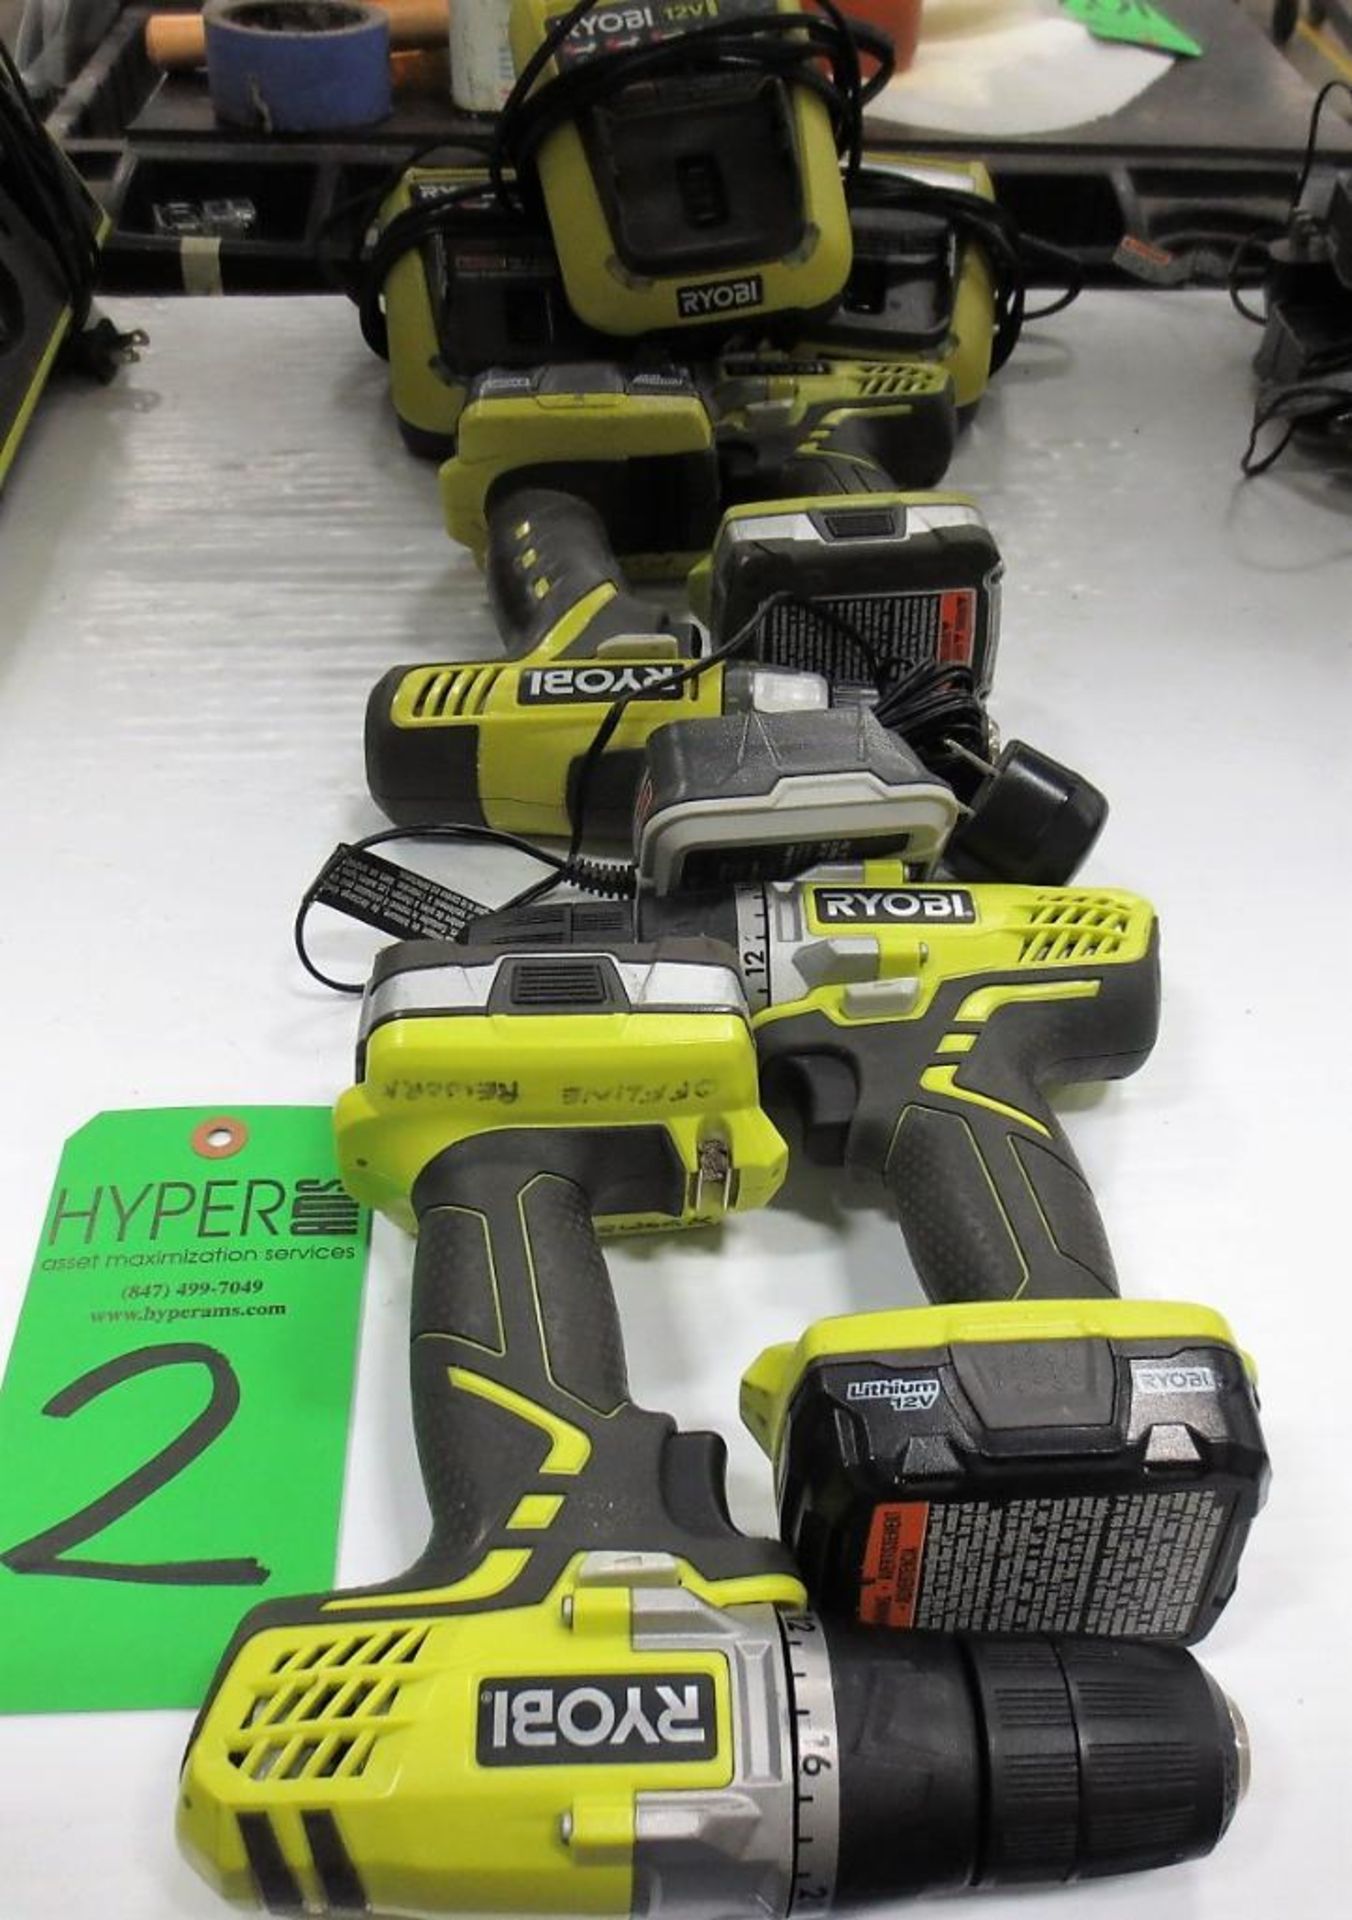 (4) Ryobi 12V Battery Drills With 3 Chargers.**Lot Located at 2395 Dakota Drive, Grafton, WI 53024**